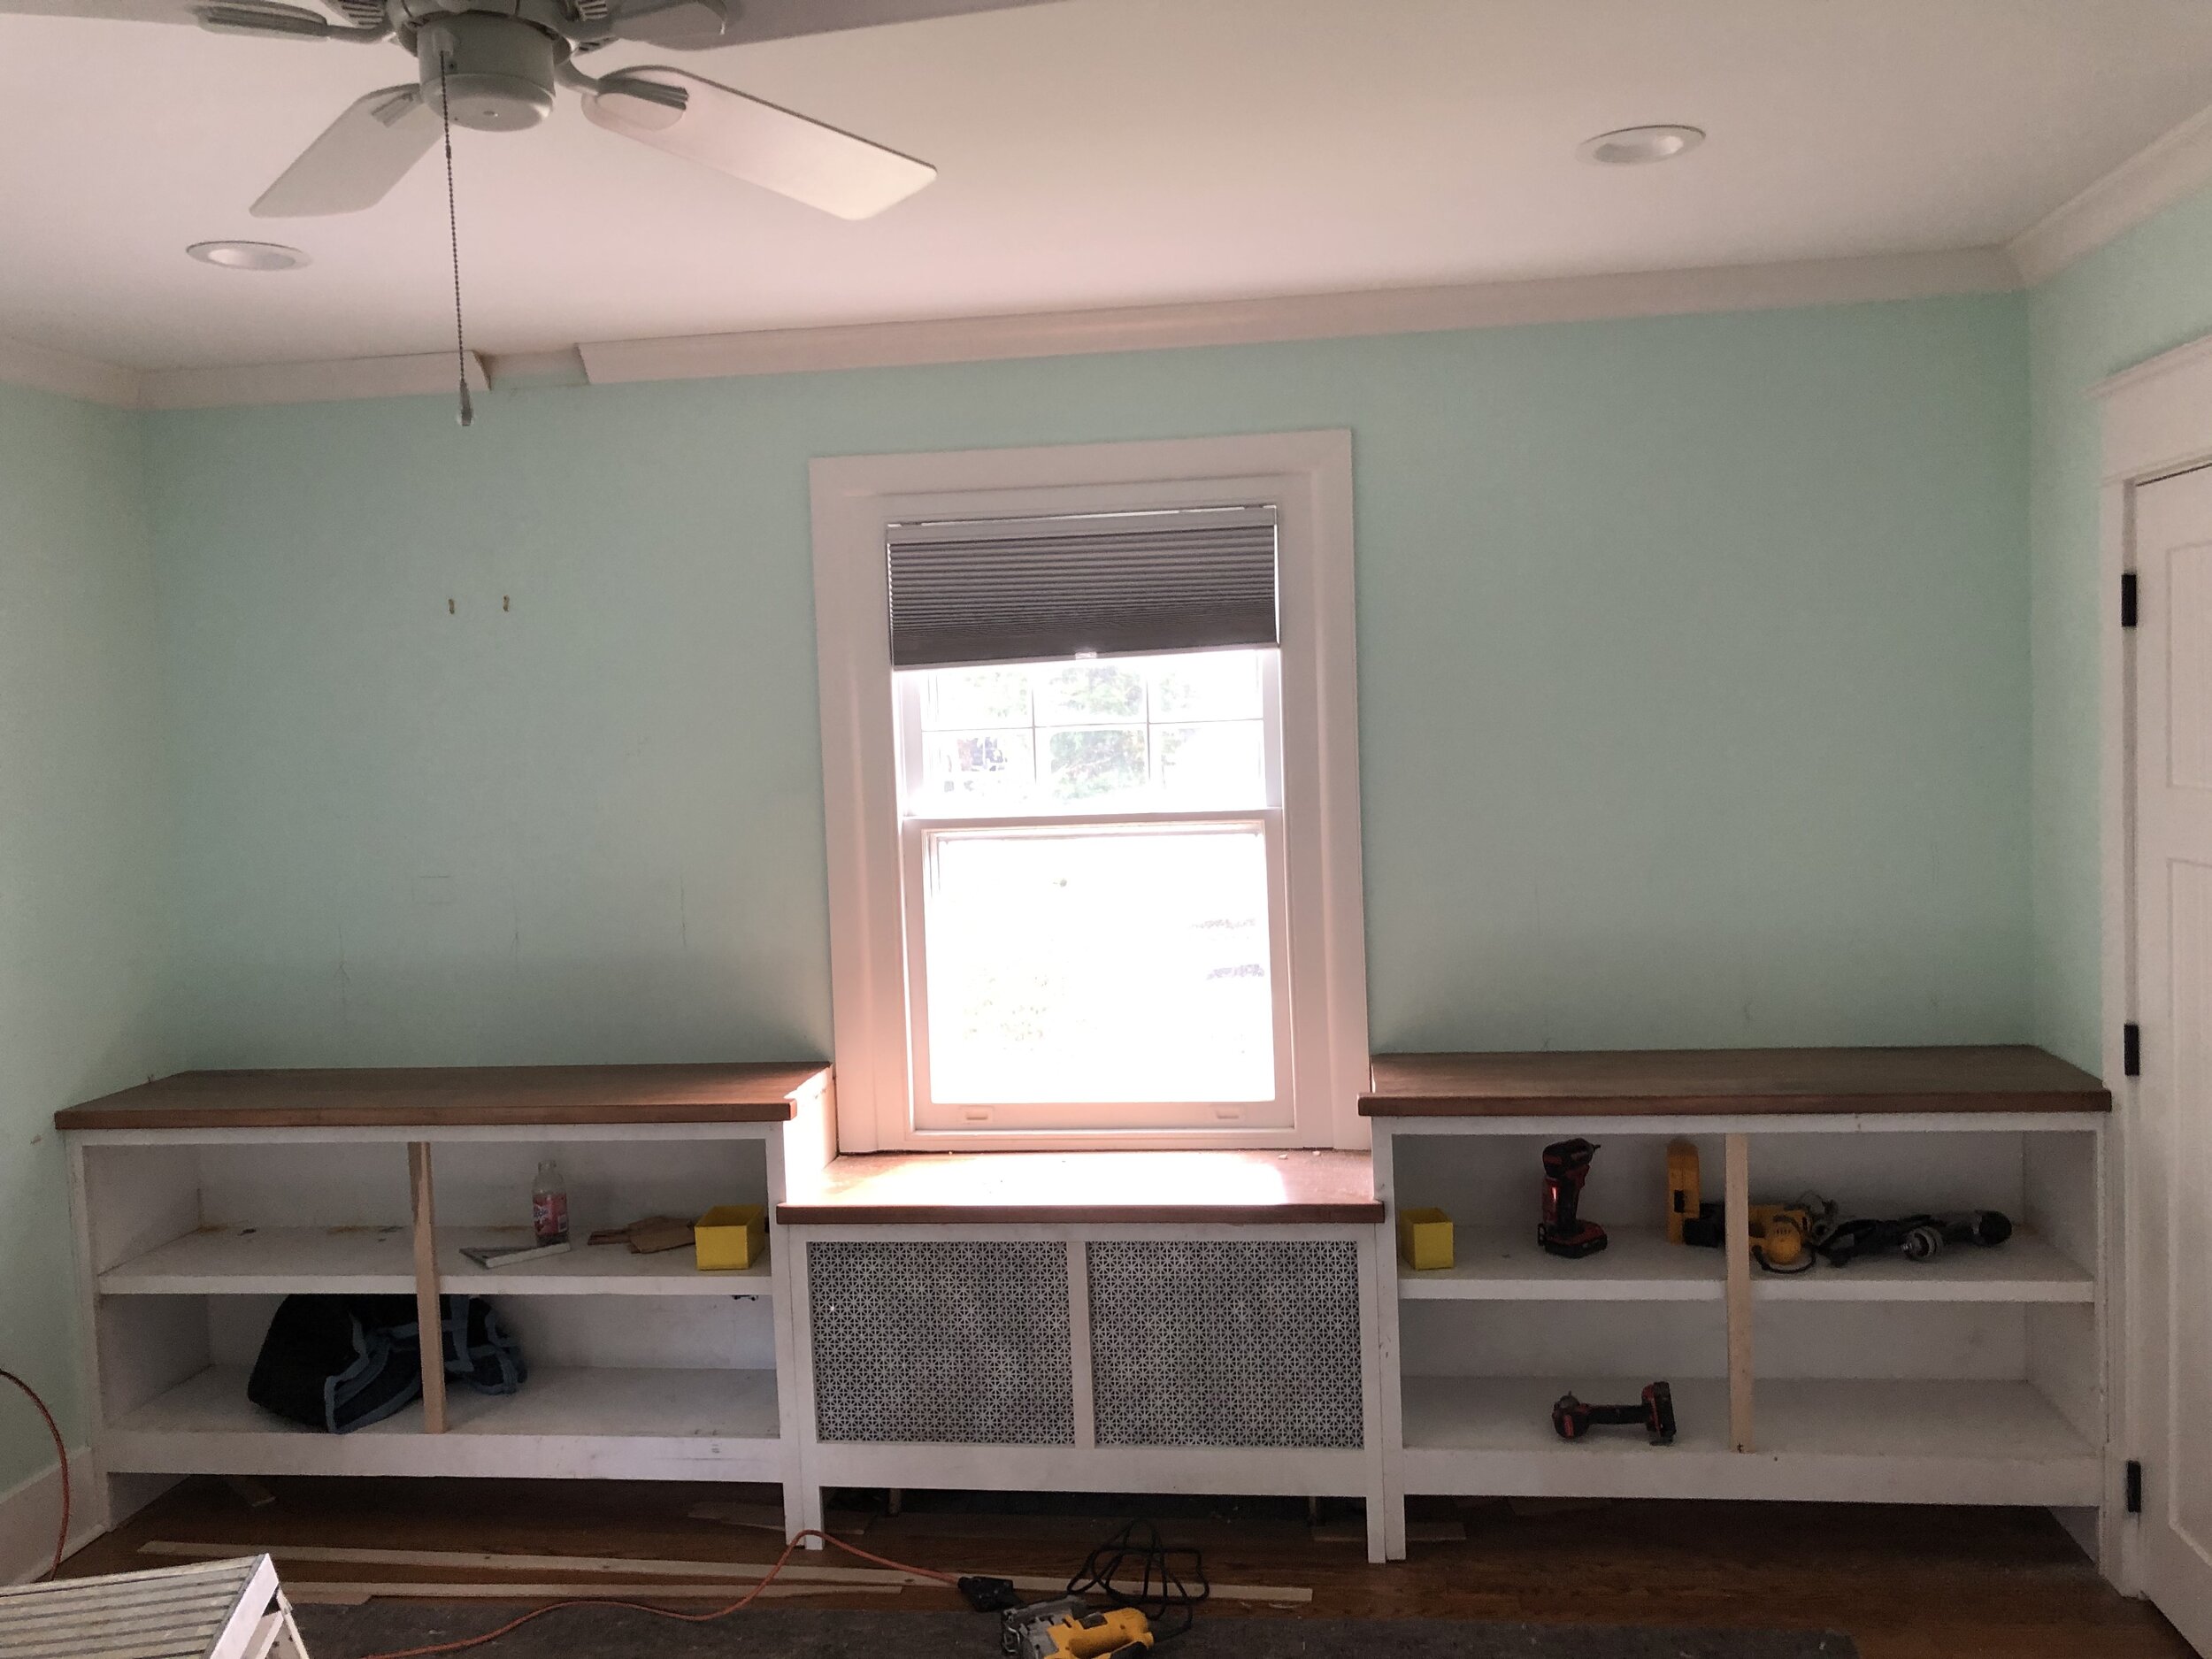  Here, the face frames have been installed, along with the new radiator cover and maple countertops. 